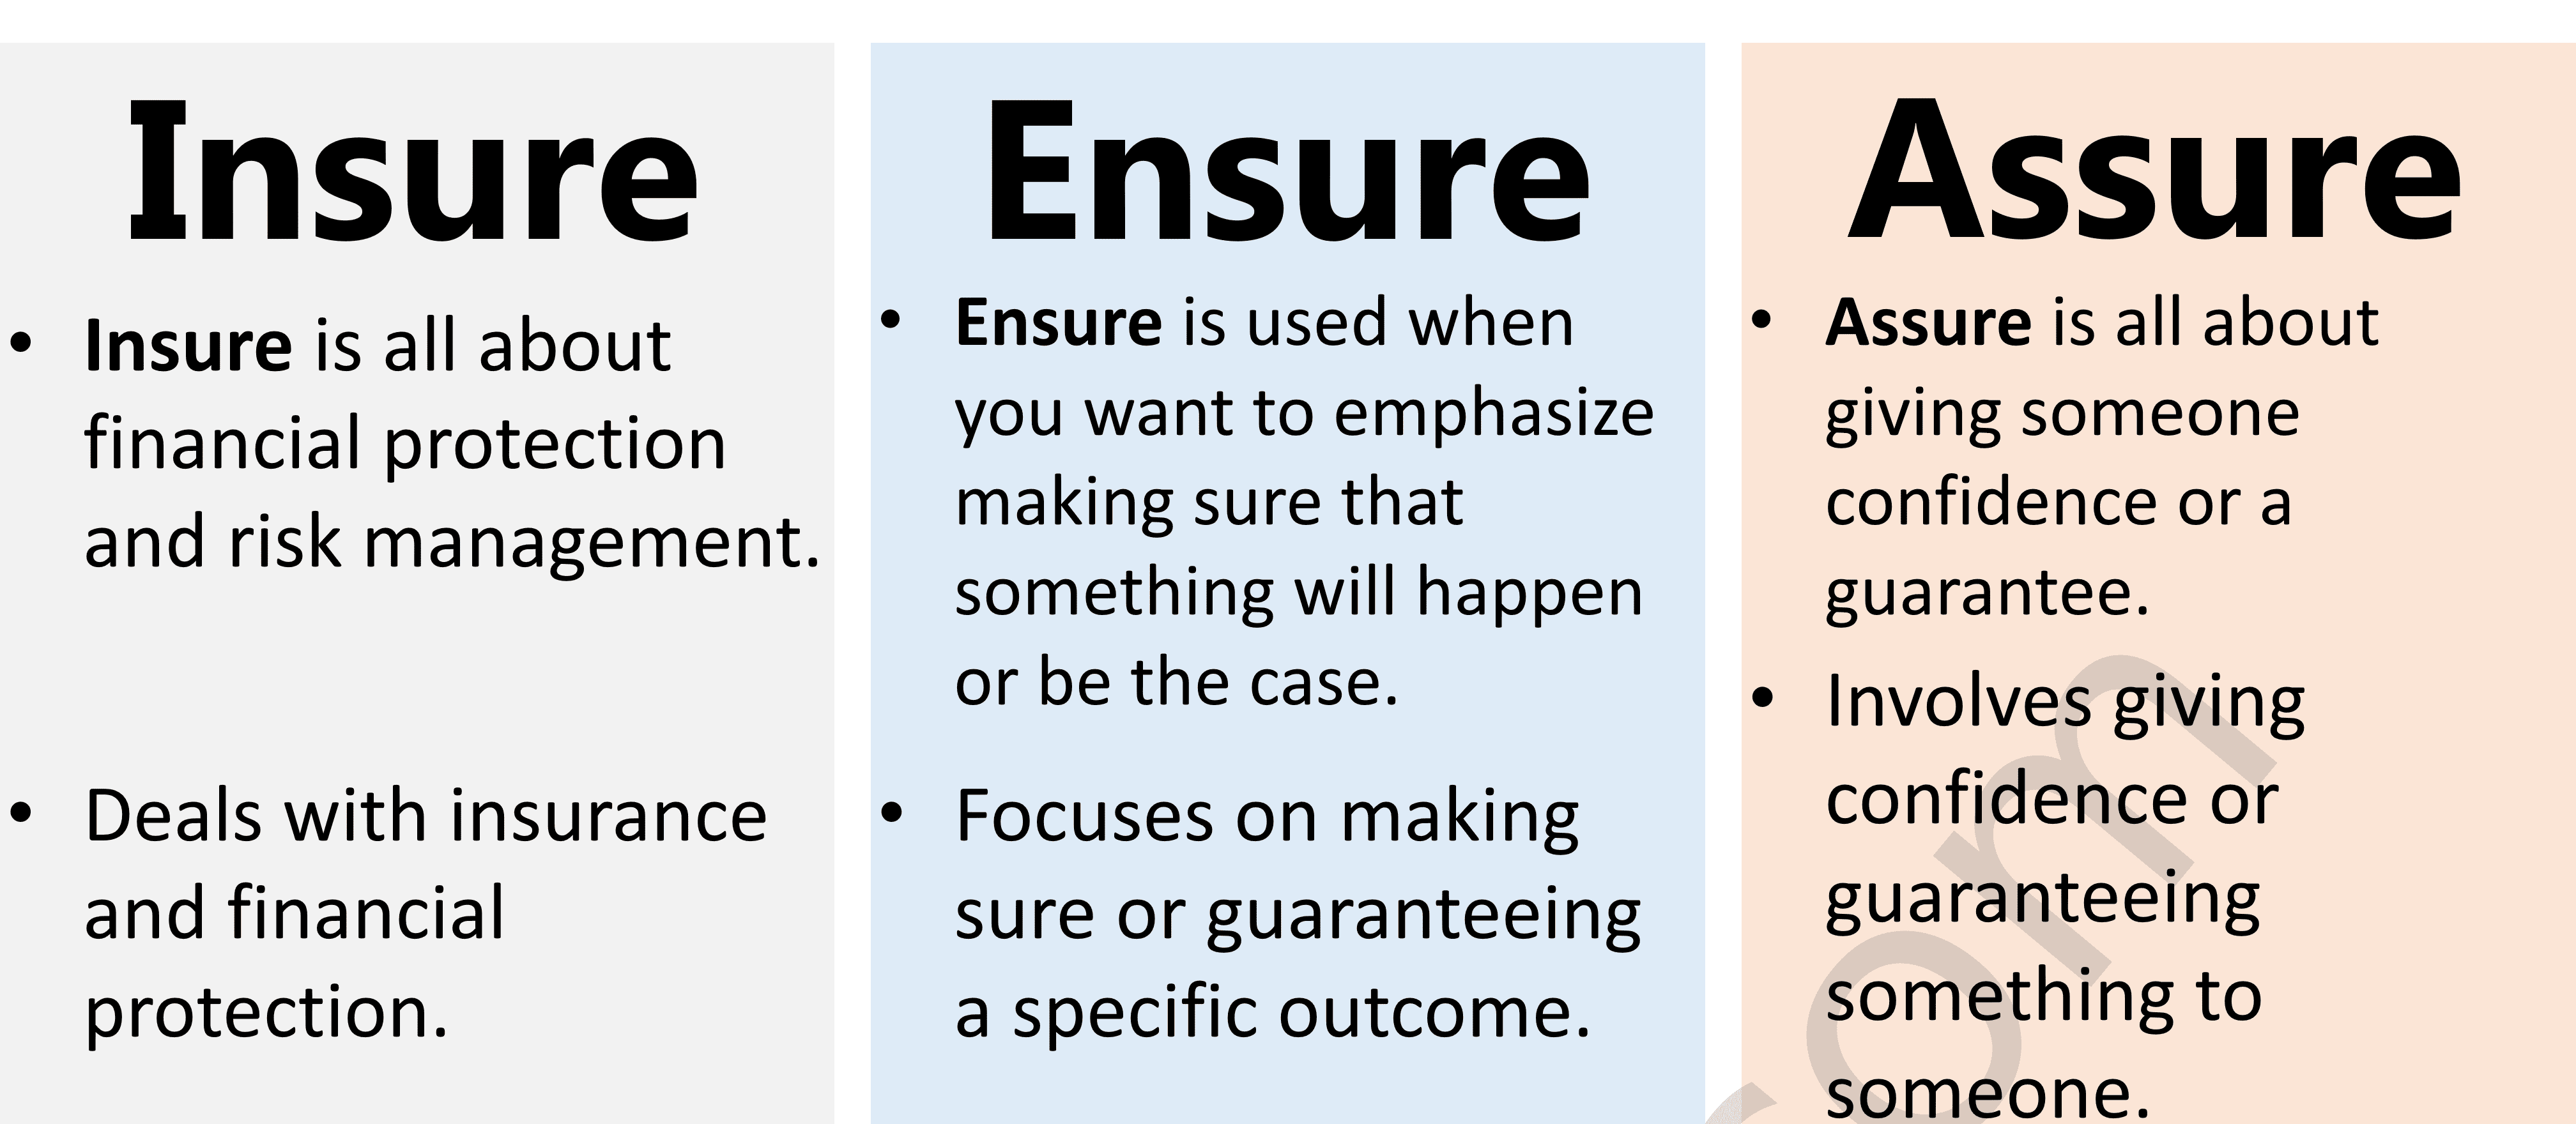 Difference Between Insure vs. Ensure vs. Assure with Examples